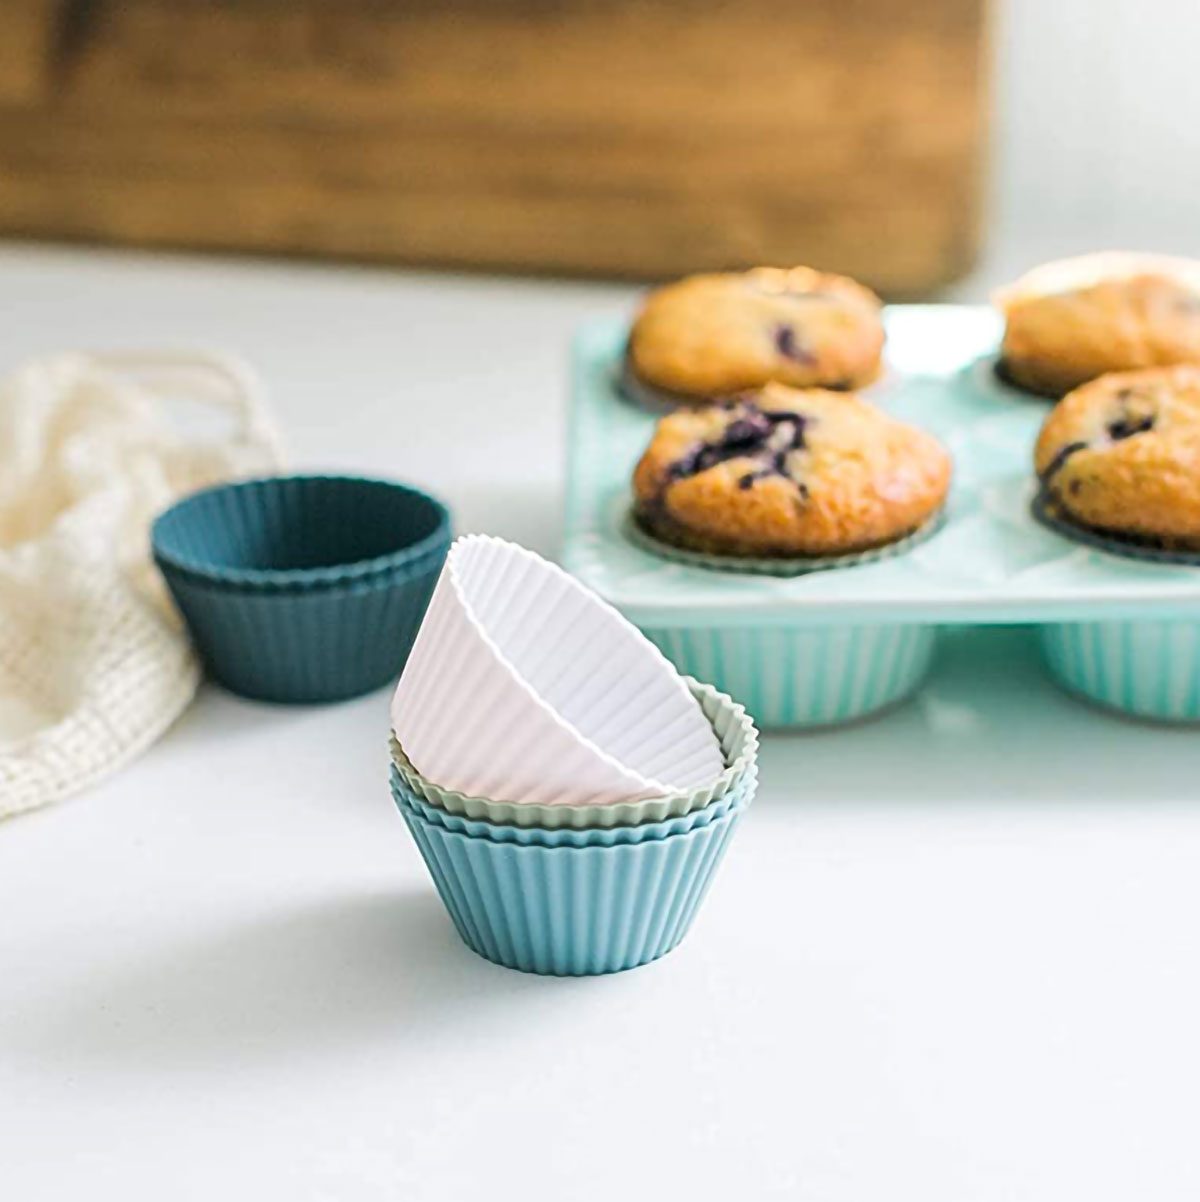 11 Ideas for Organizing Baking Supplies